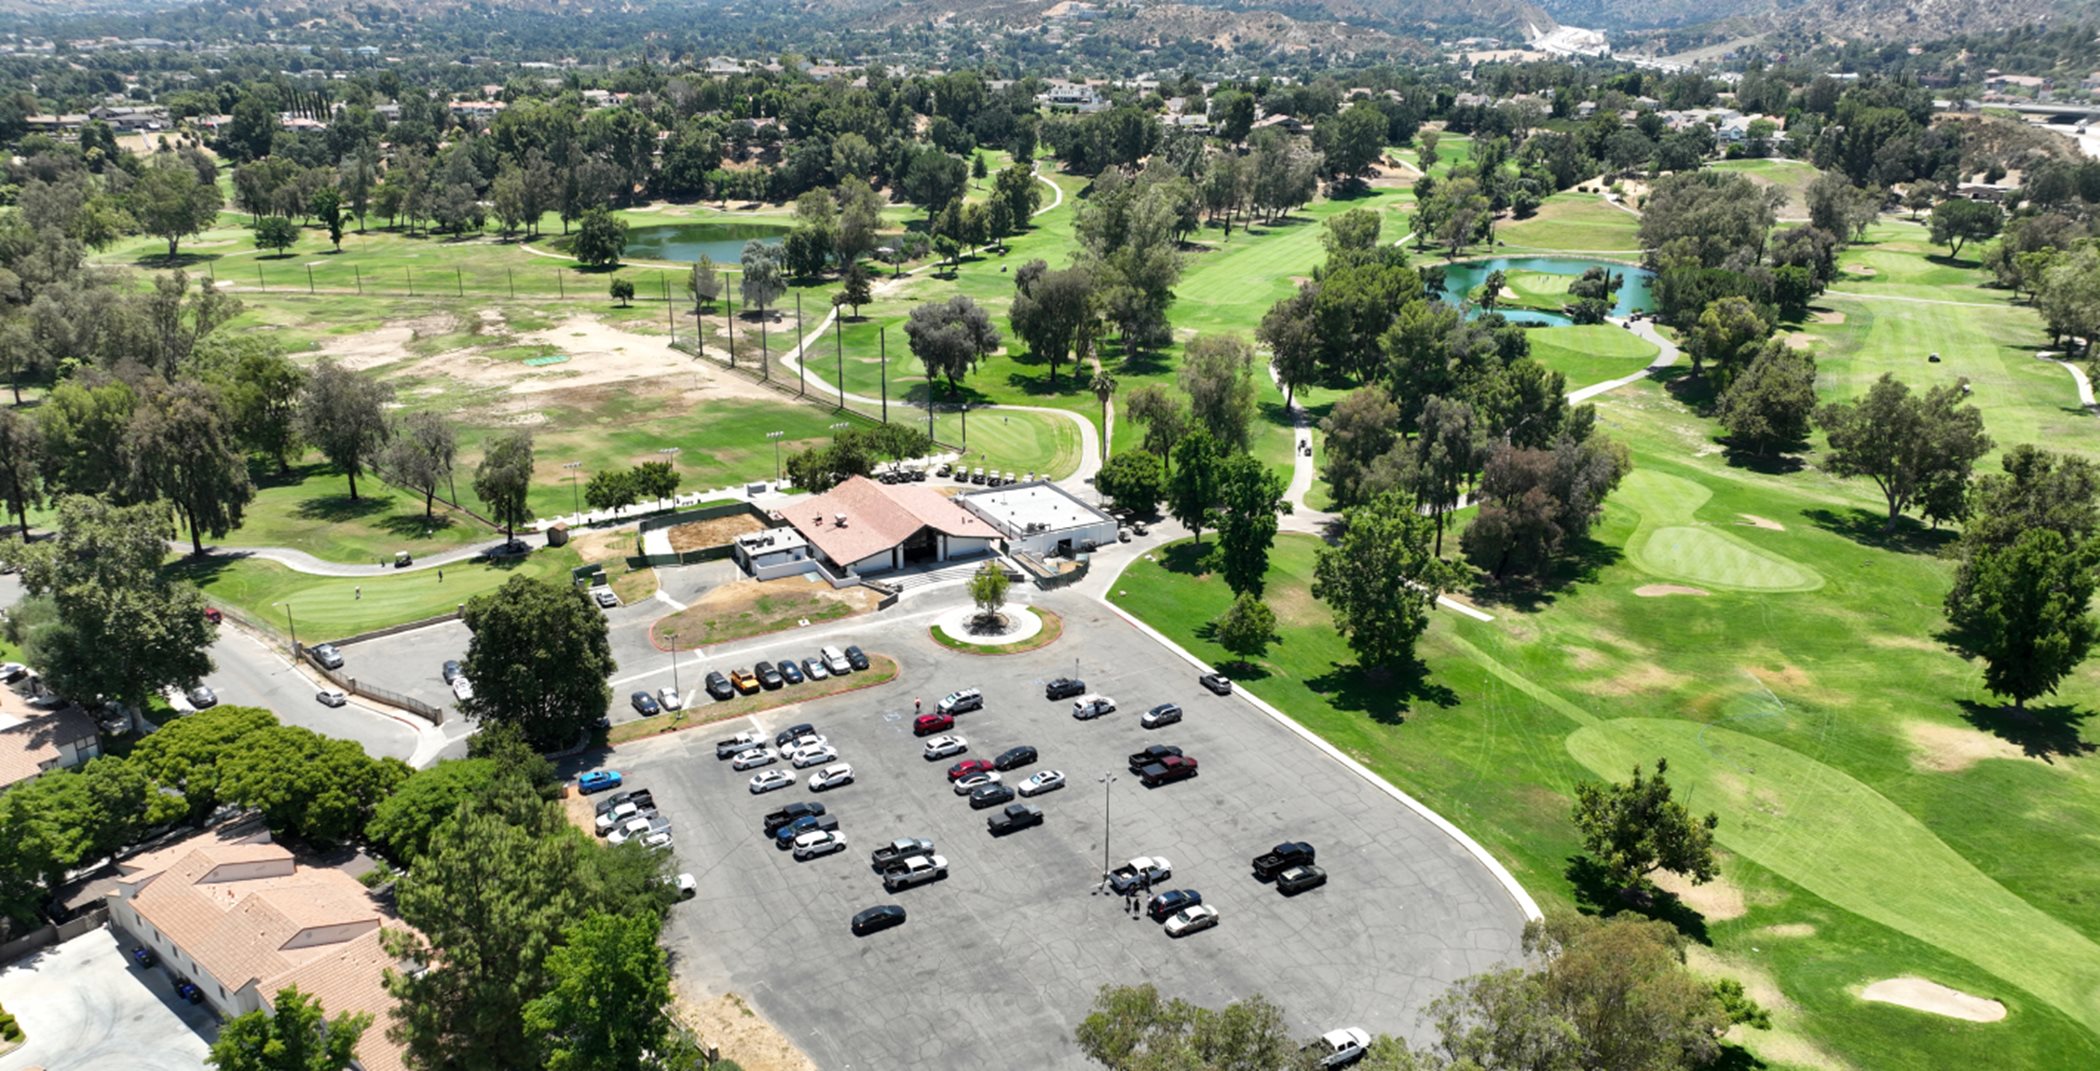 Aerial view of a nearby golf course and parking lot